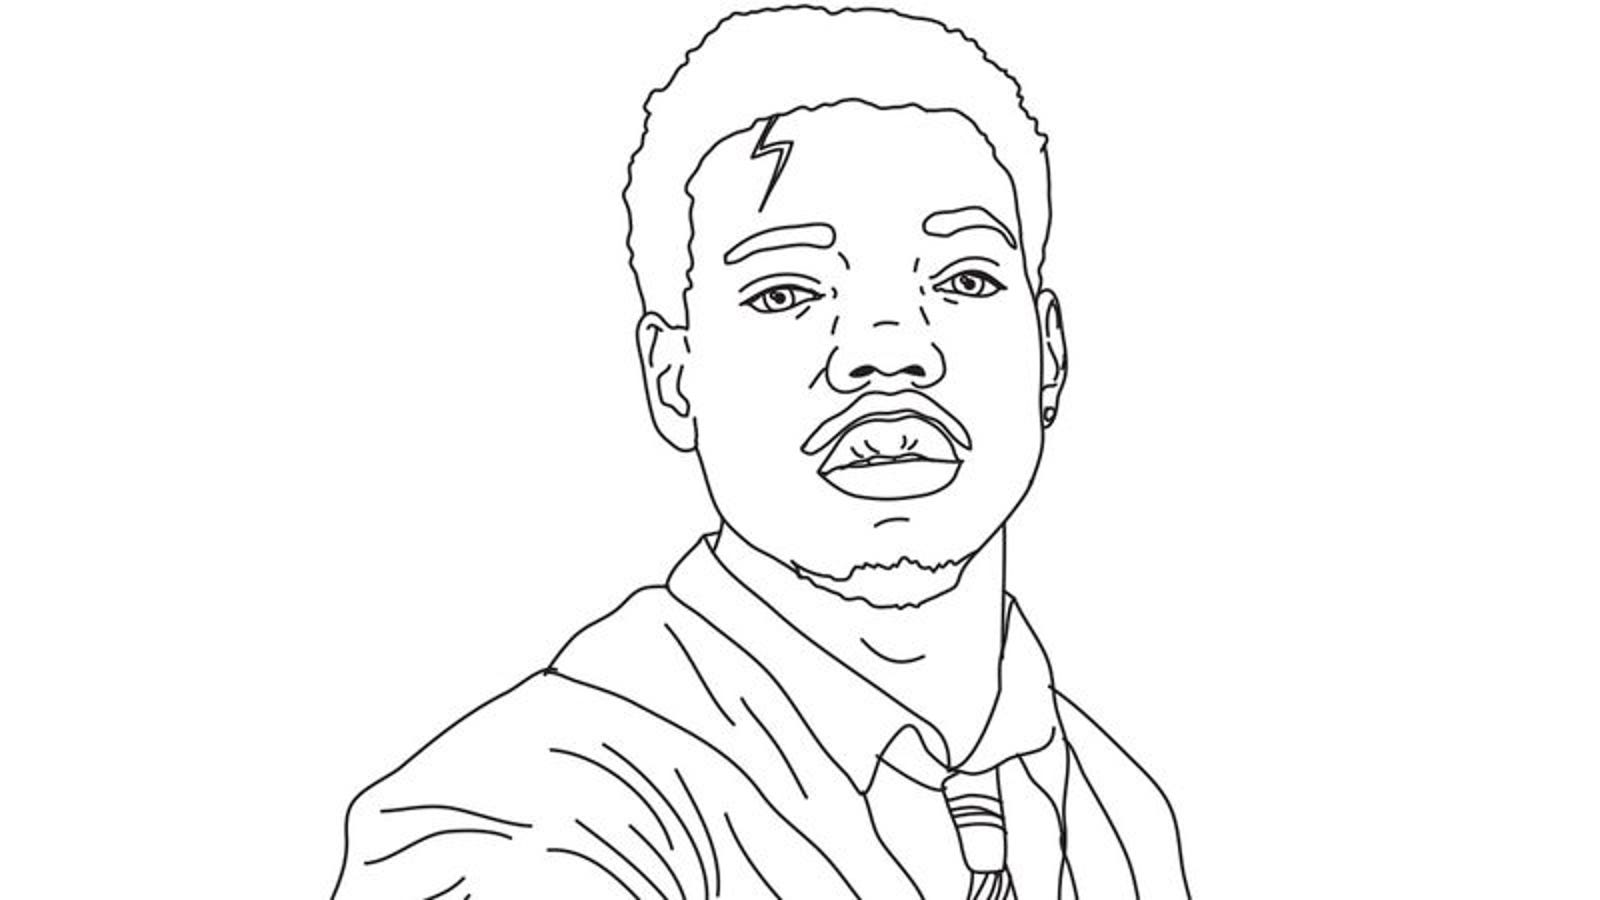 Chance The Rappers Coloring Book now has an actual